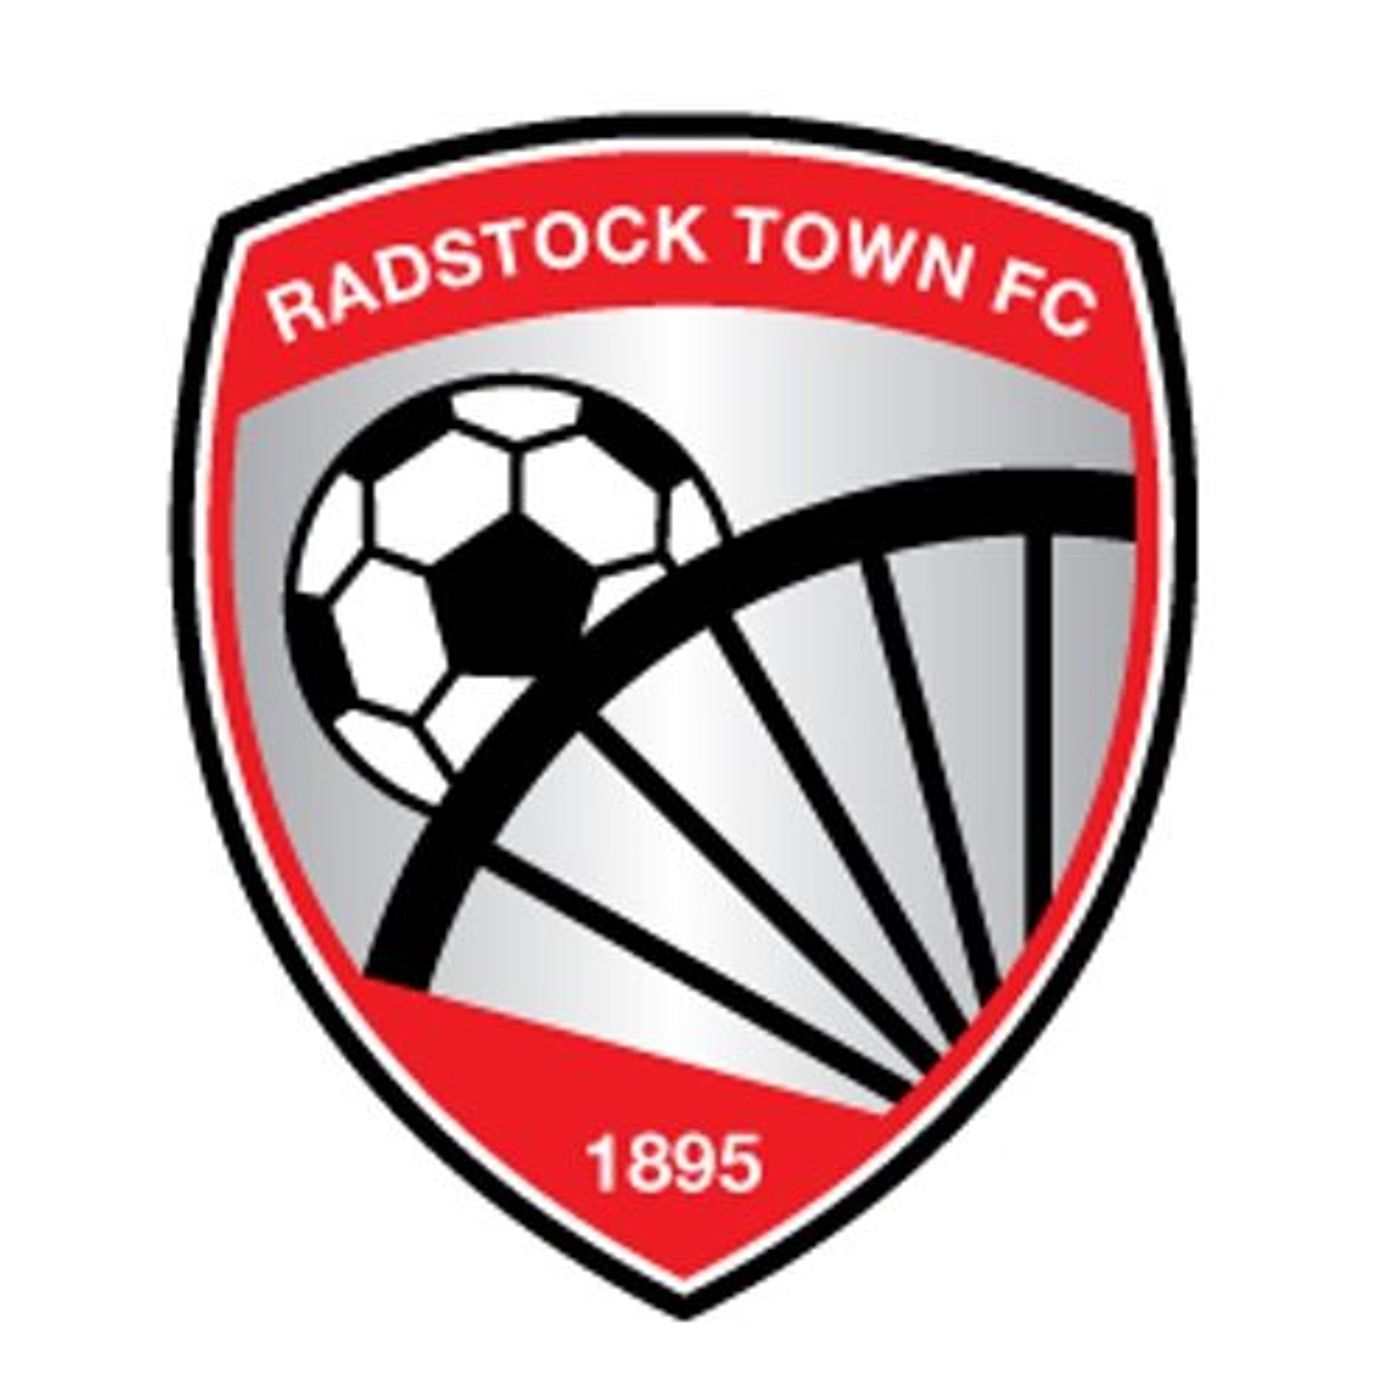 Ian Lanning and the Progression of Radstock's Under 18s